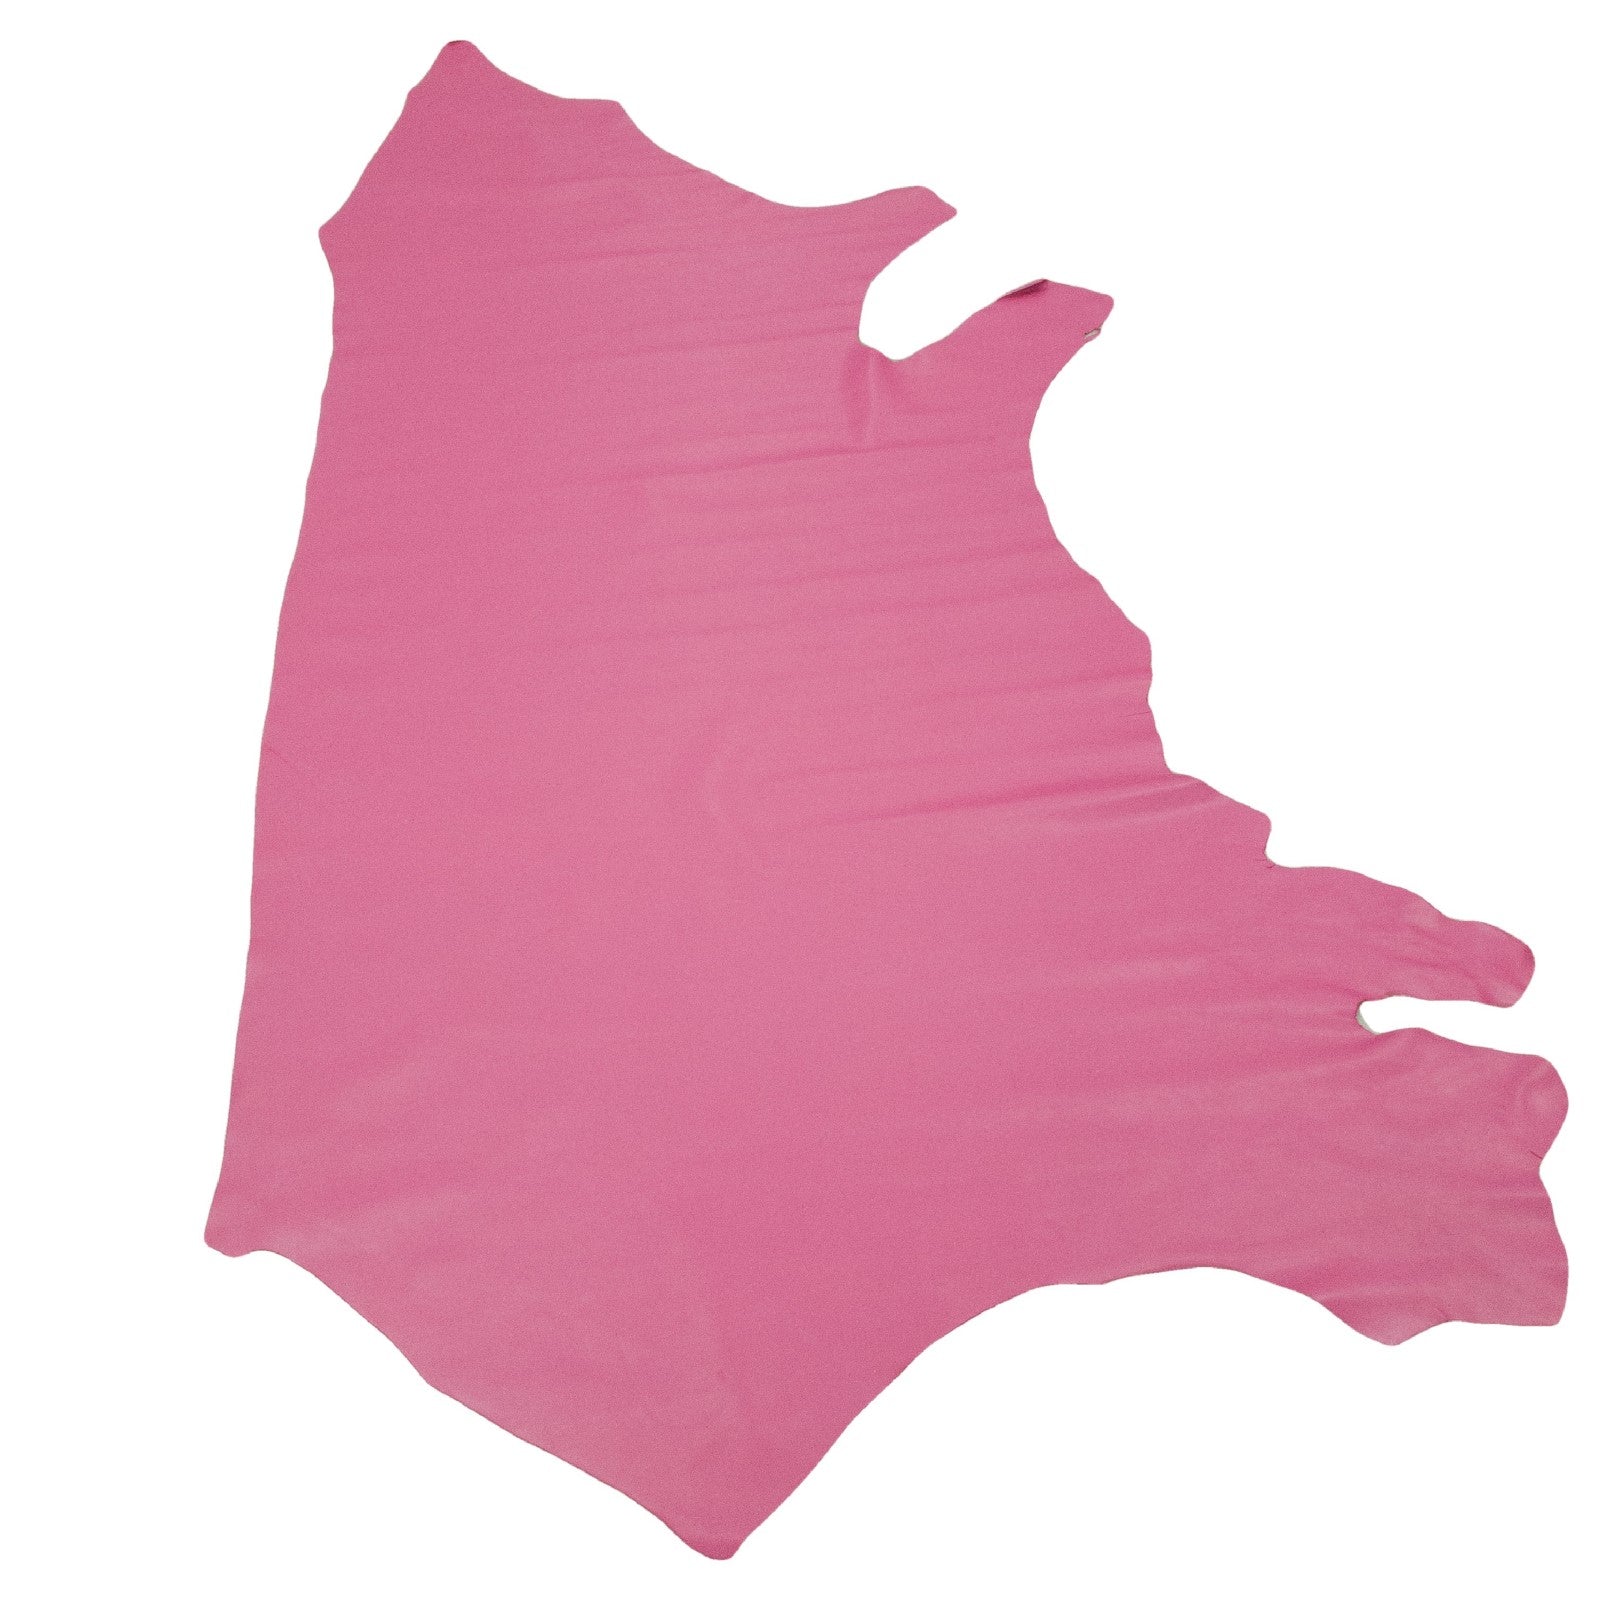 Messi Miami Pink, 3-3.5 oz Cow Hides, Starting Lineup, Side / 18-20 Sq Ft | The Leather Guy